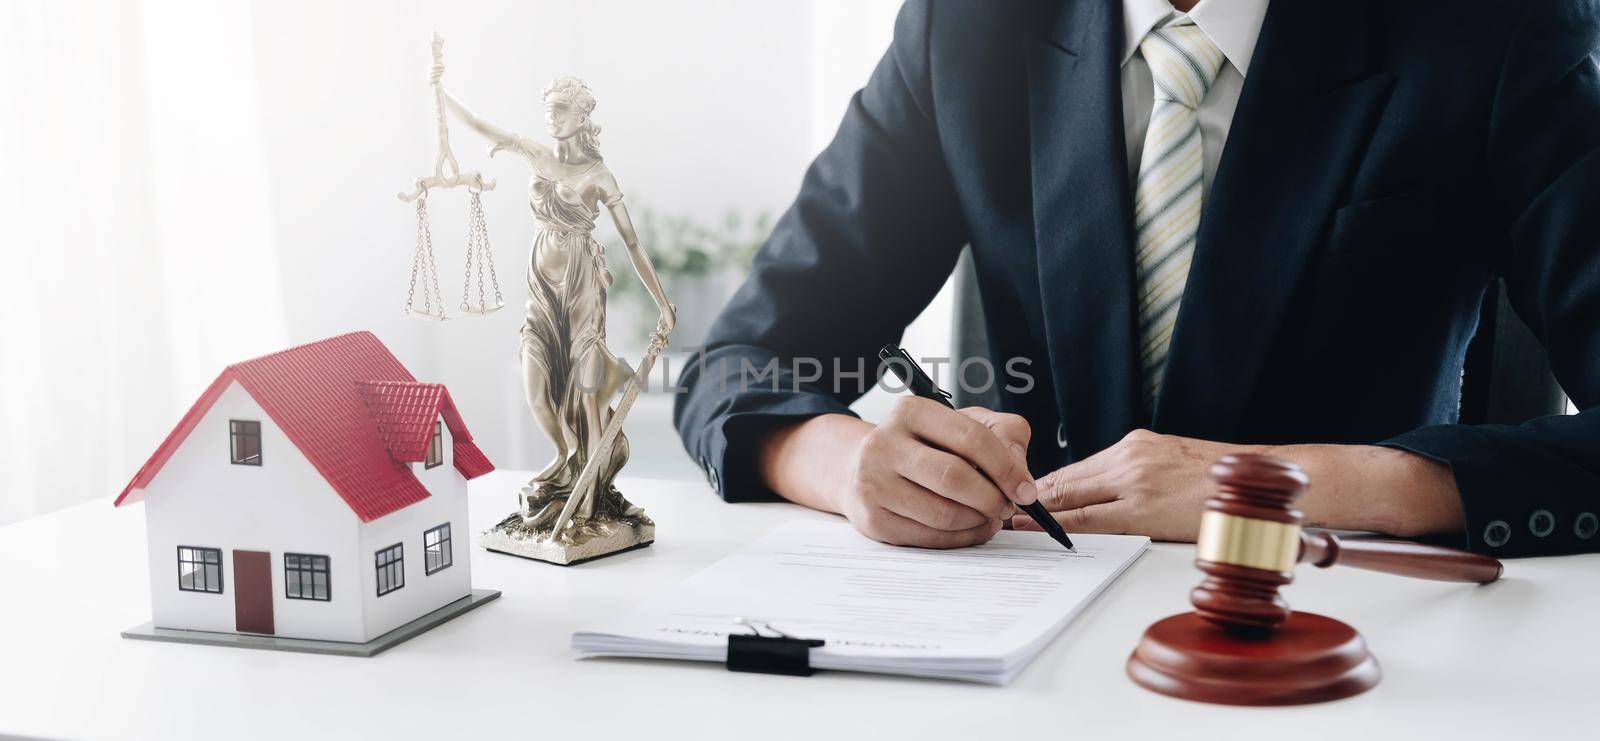 Judge gavel and house model on the table. Man signing in document. Real Estate Lawyer.